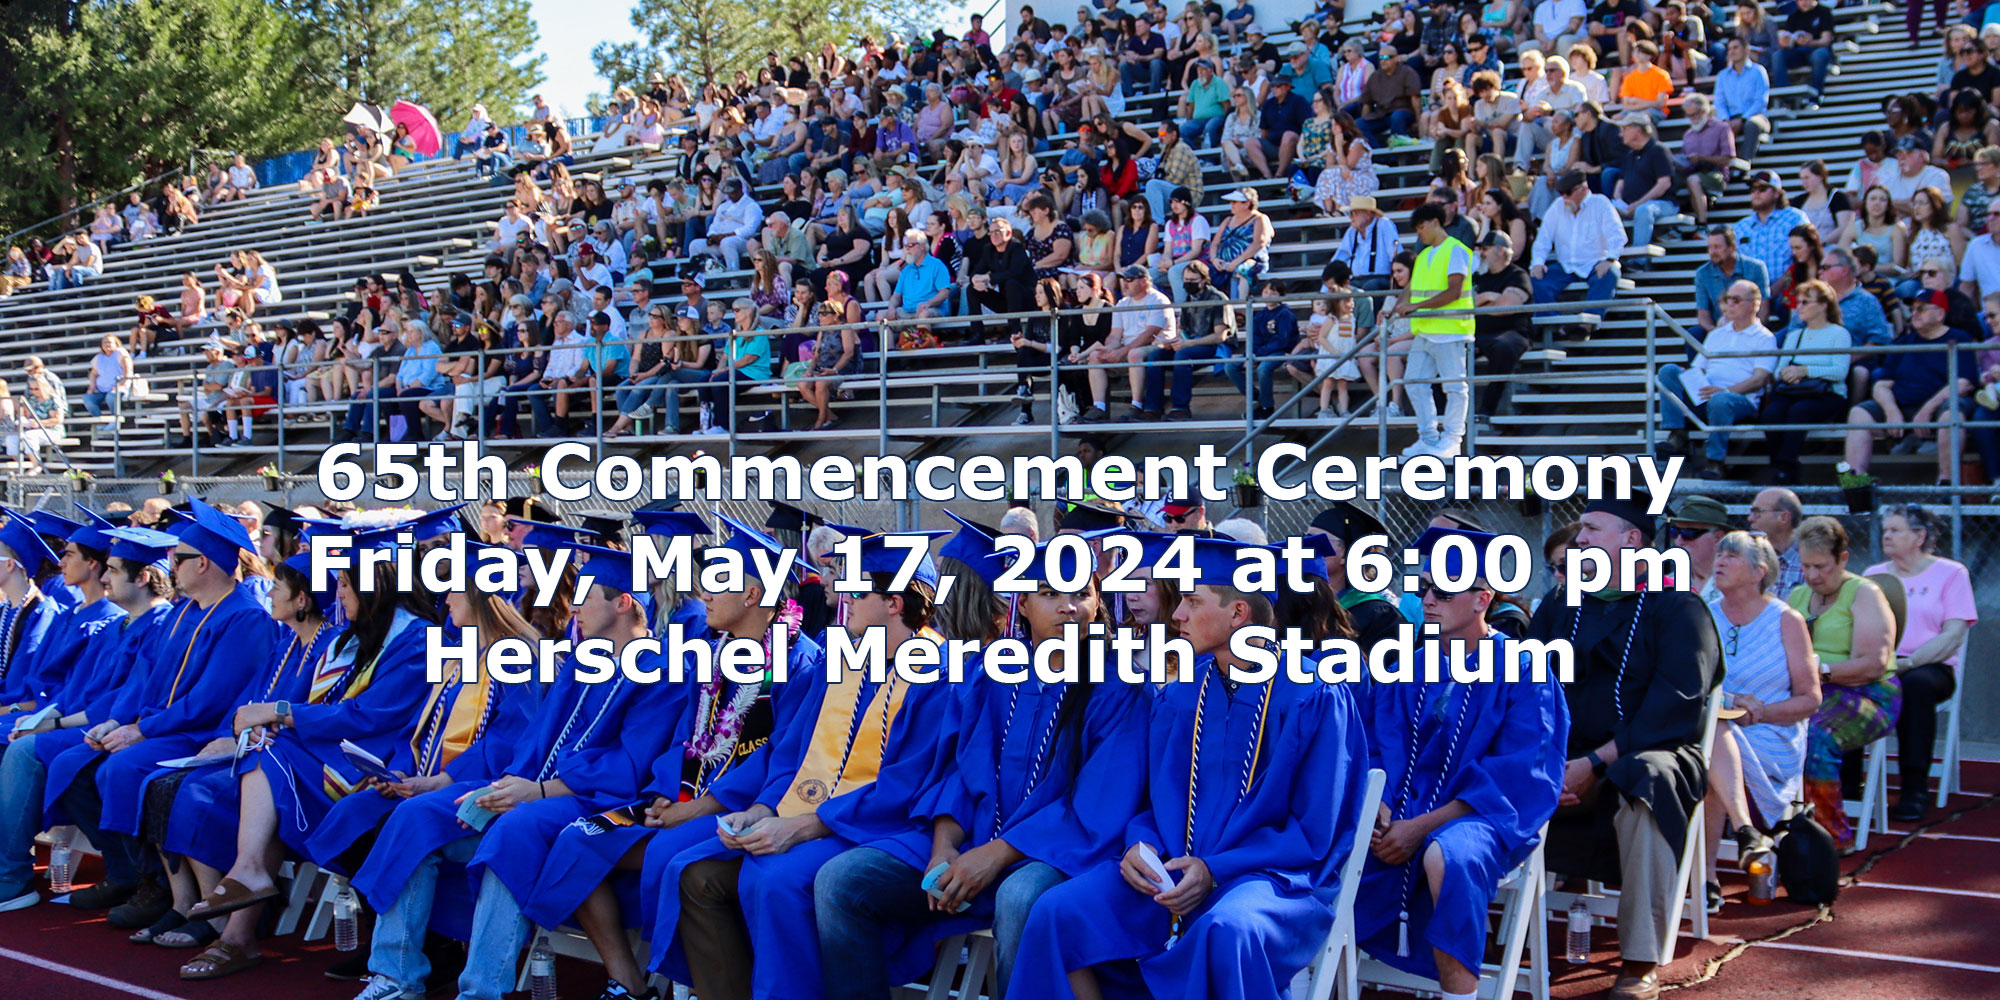 65th Commencement Ceremony. Friday, May 17, 2024 at 6:00 pm. Herschel Meredith Stadium.